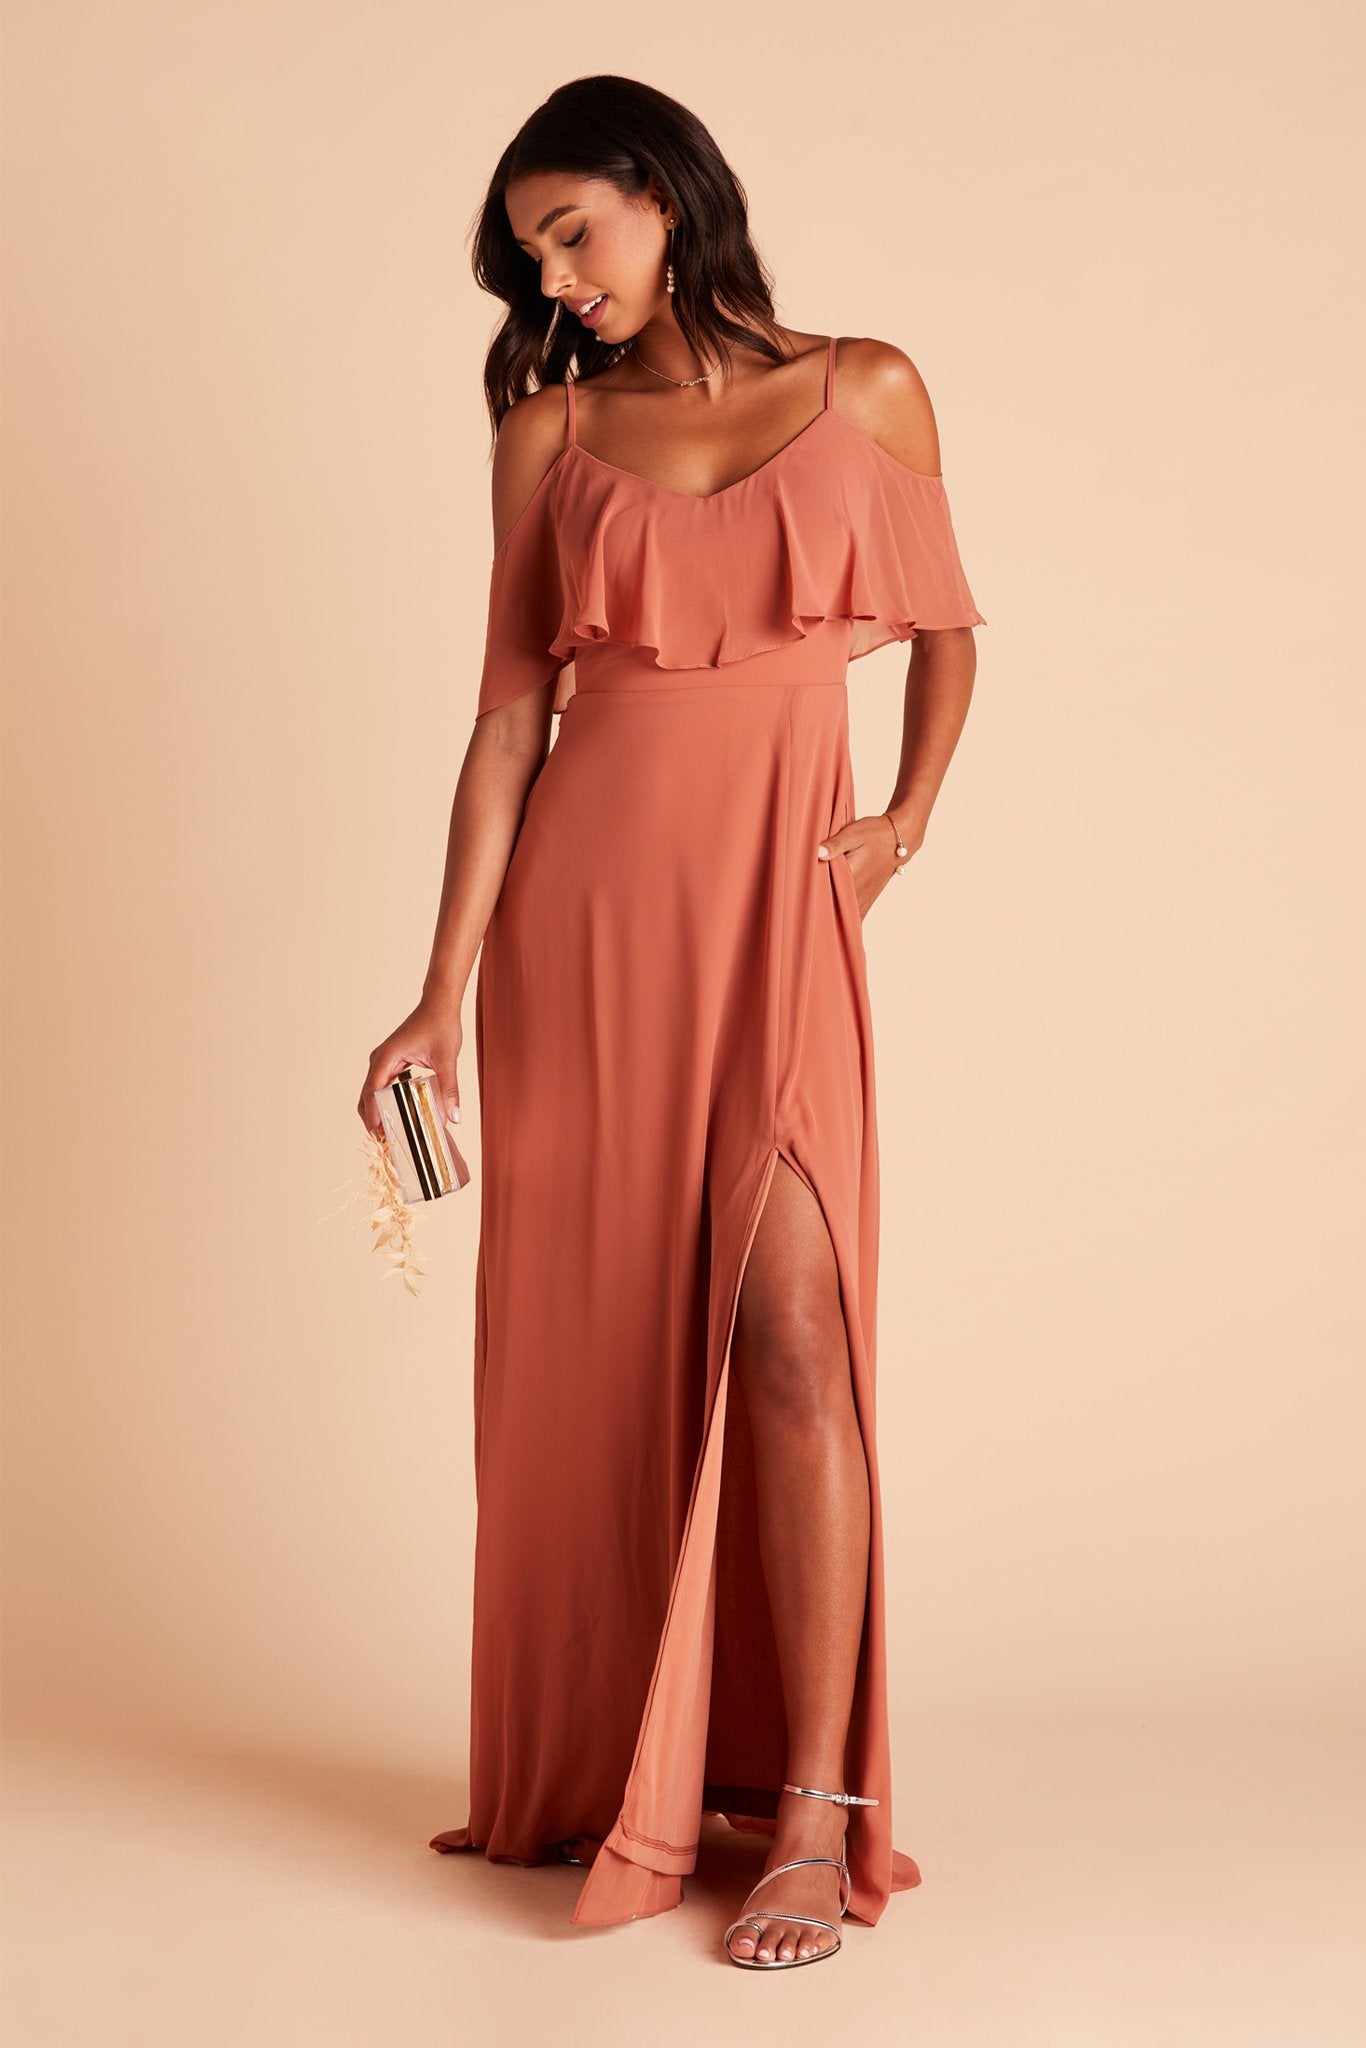 Jane convertible bridesmaid dress with slit in terracotta orange chiffon by Birdy Grey, front view with hand in pocket